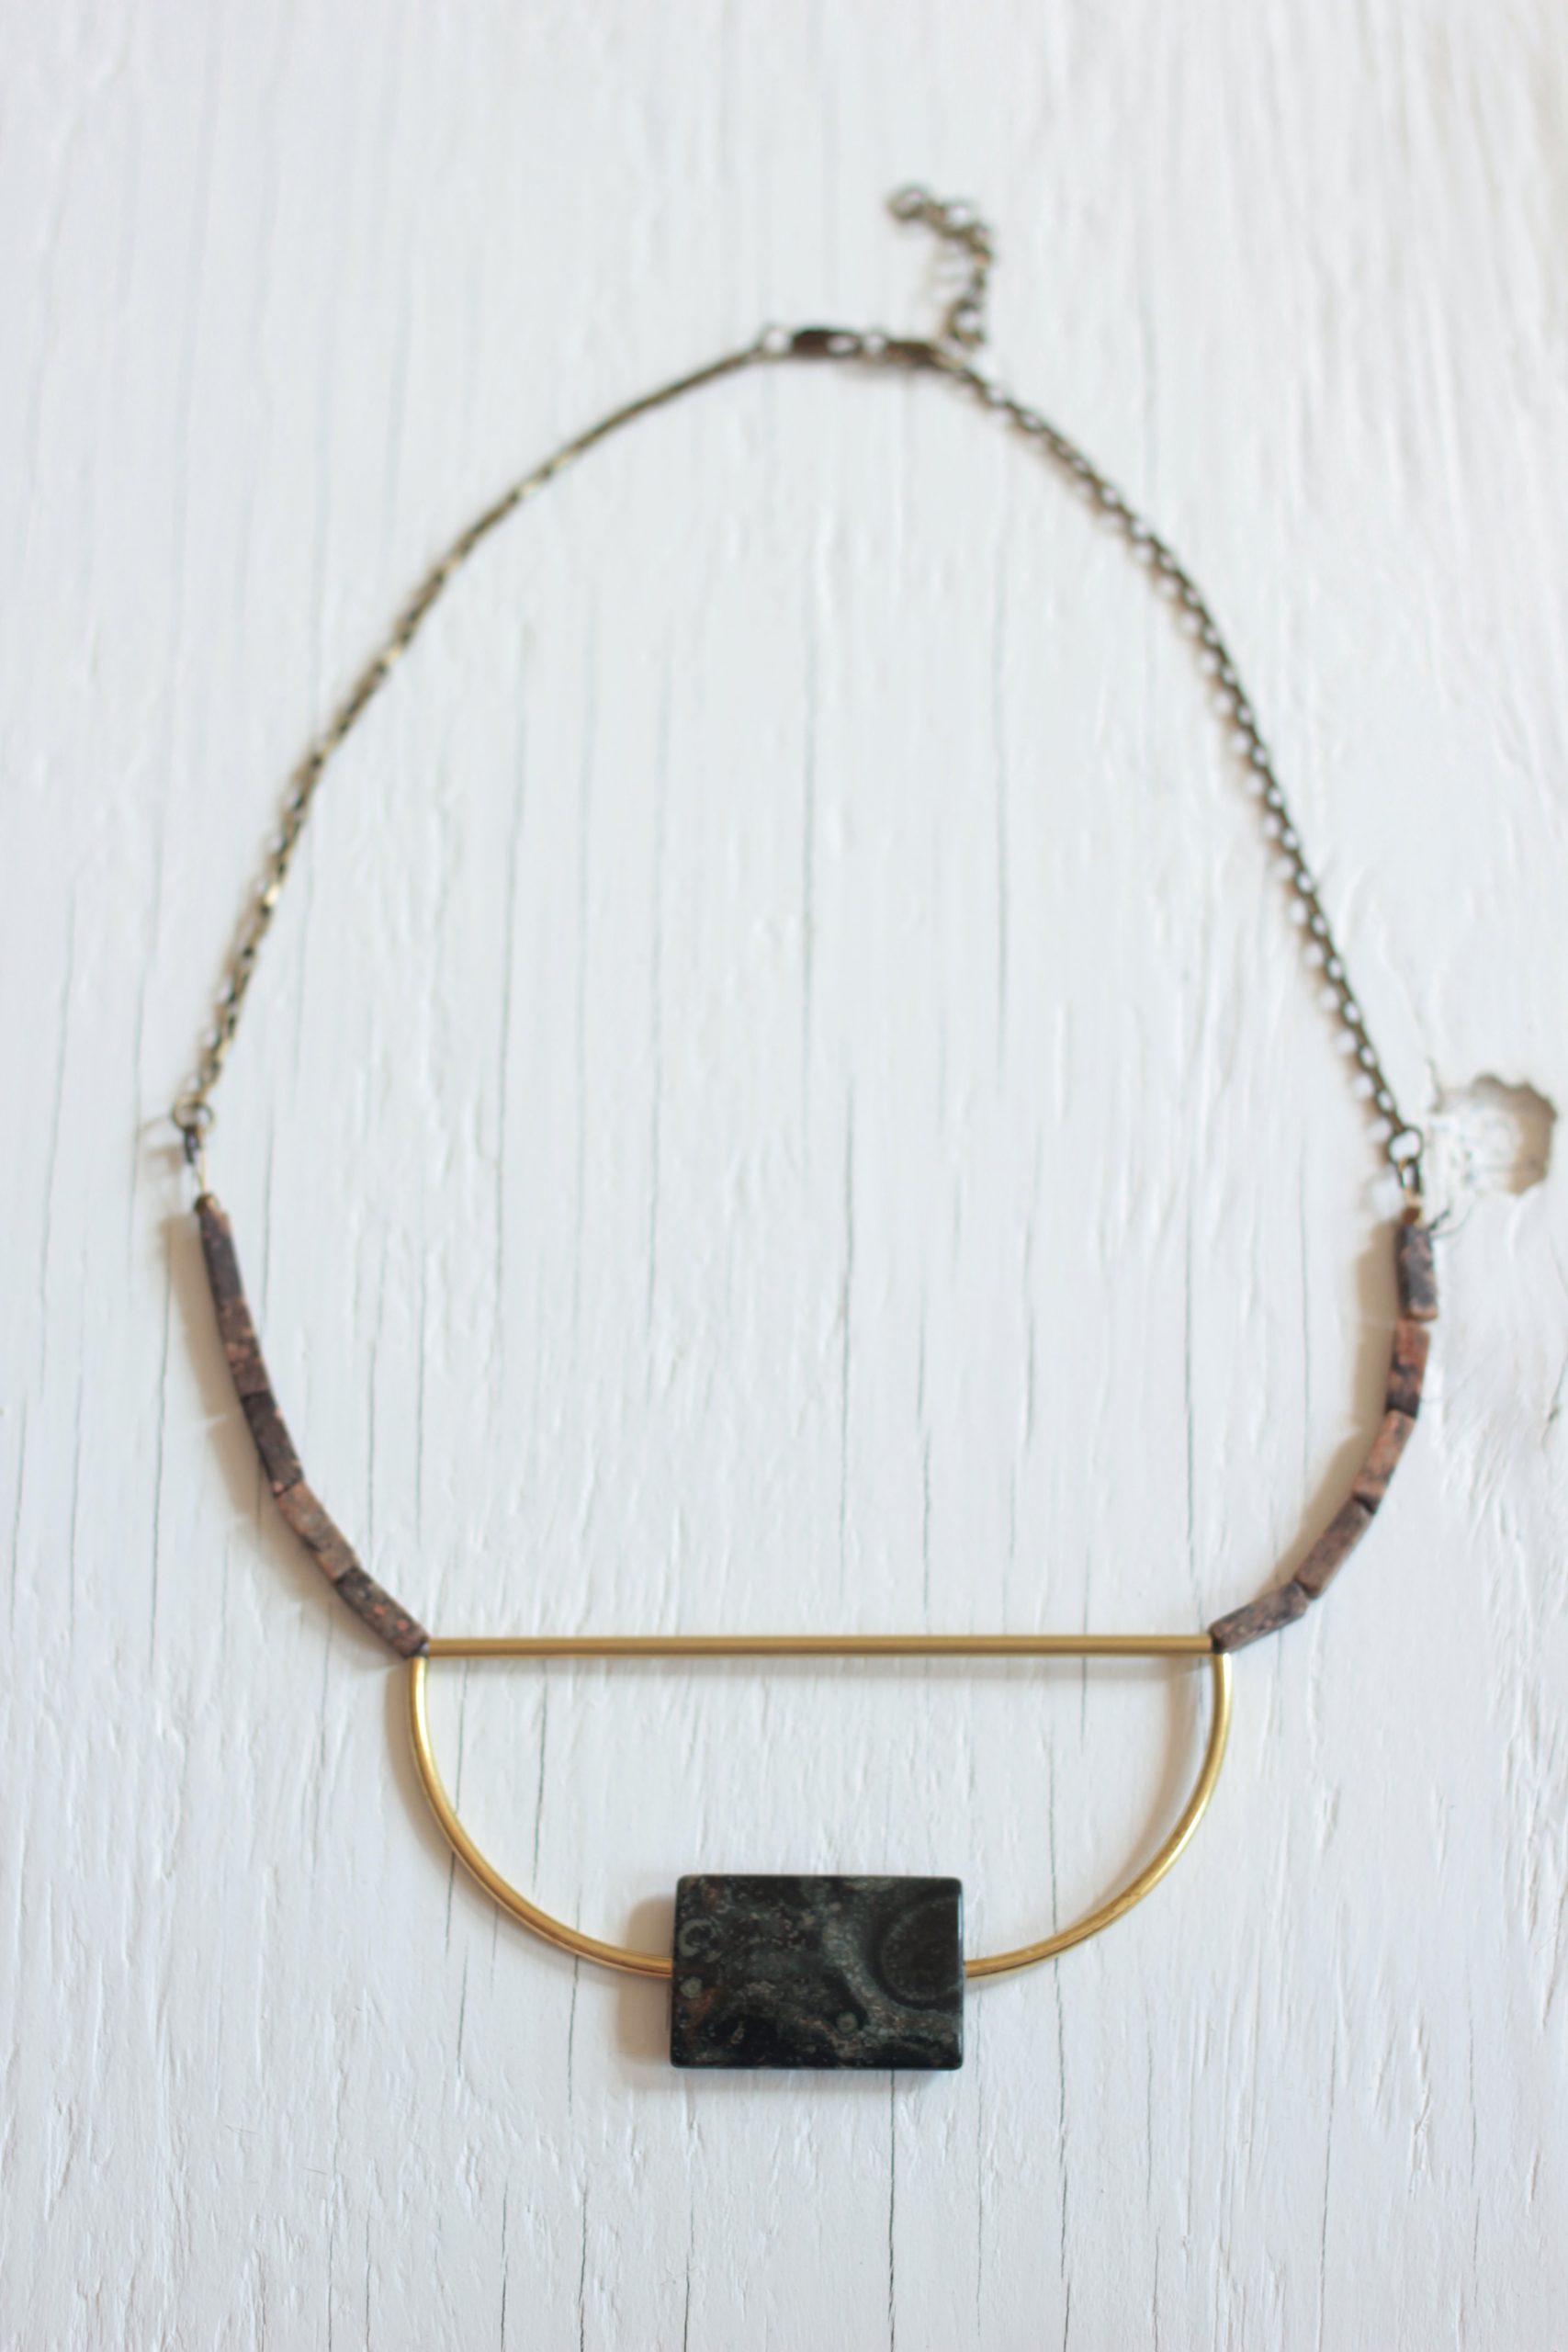 Green stone bib necklace with brass bars